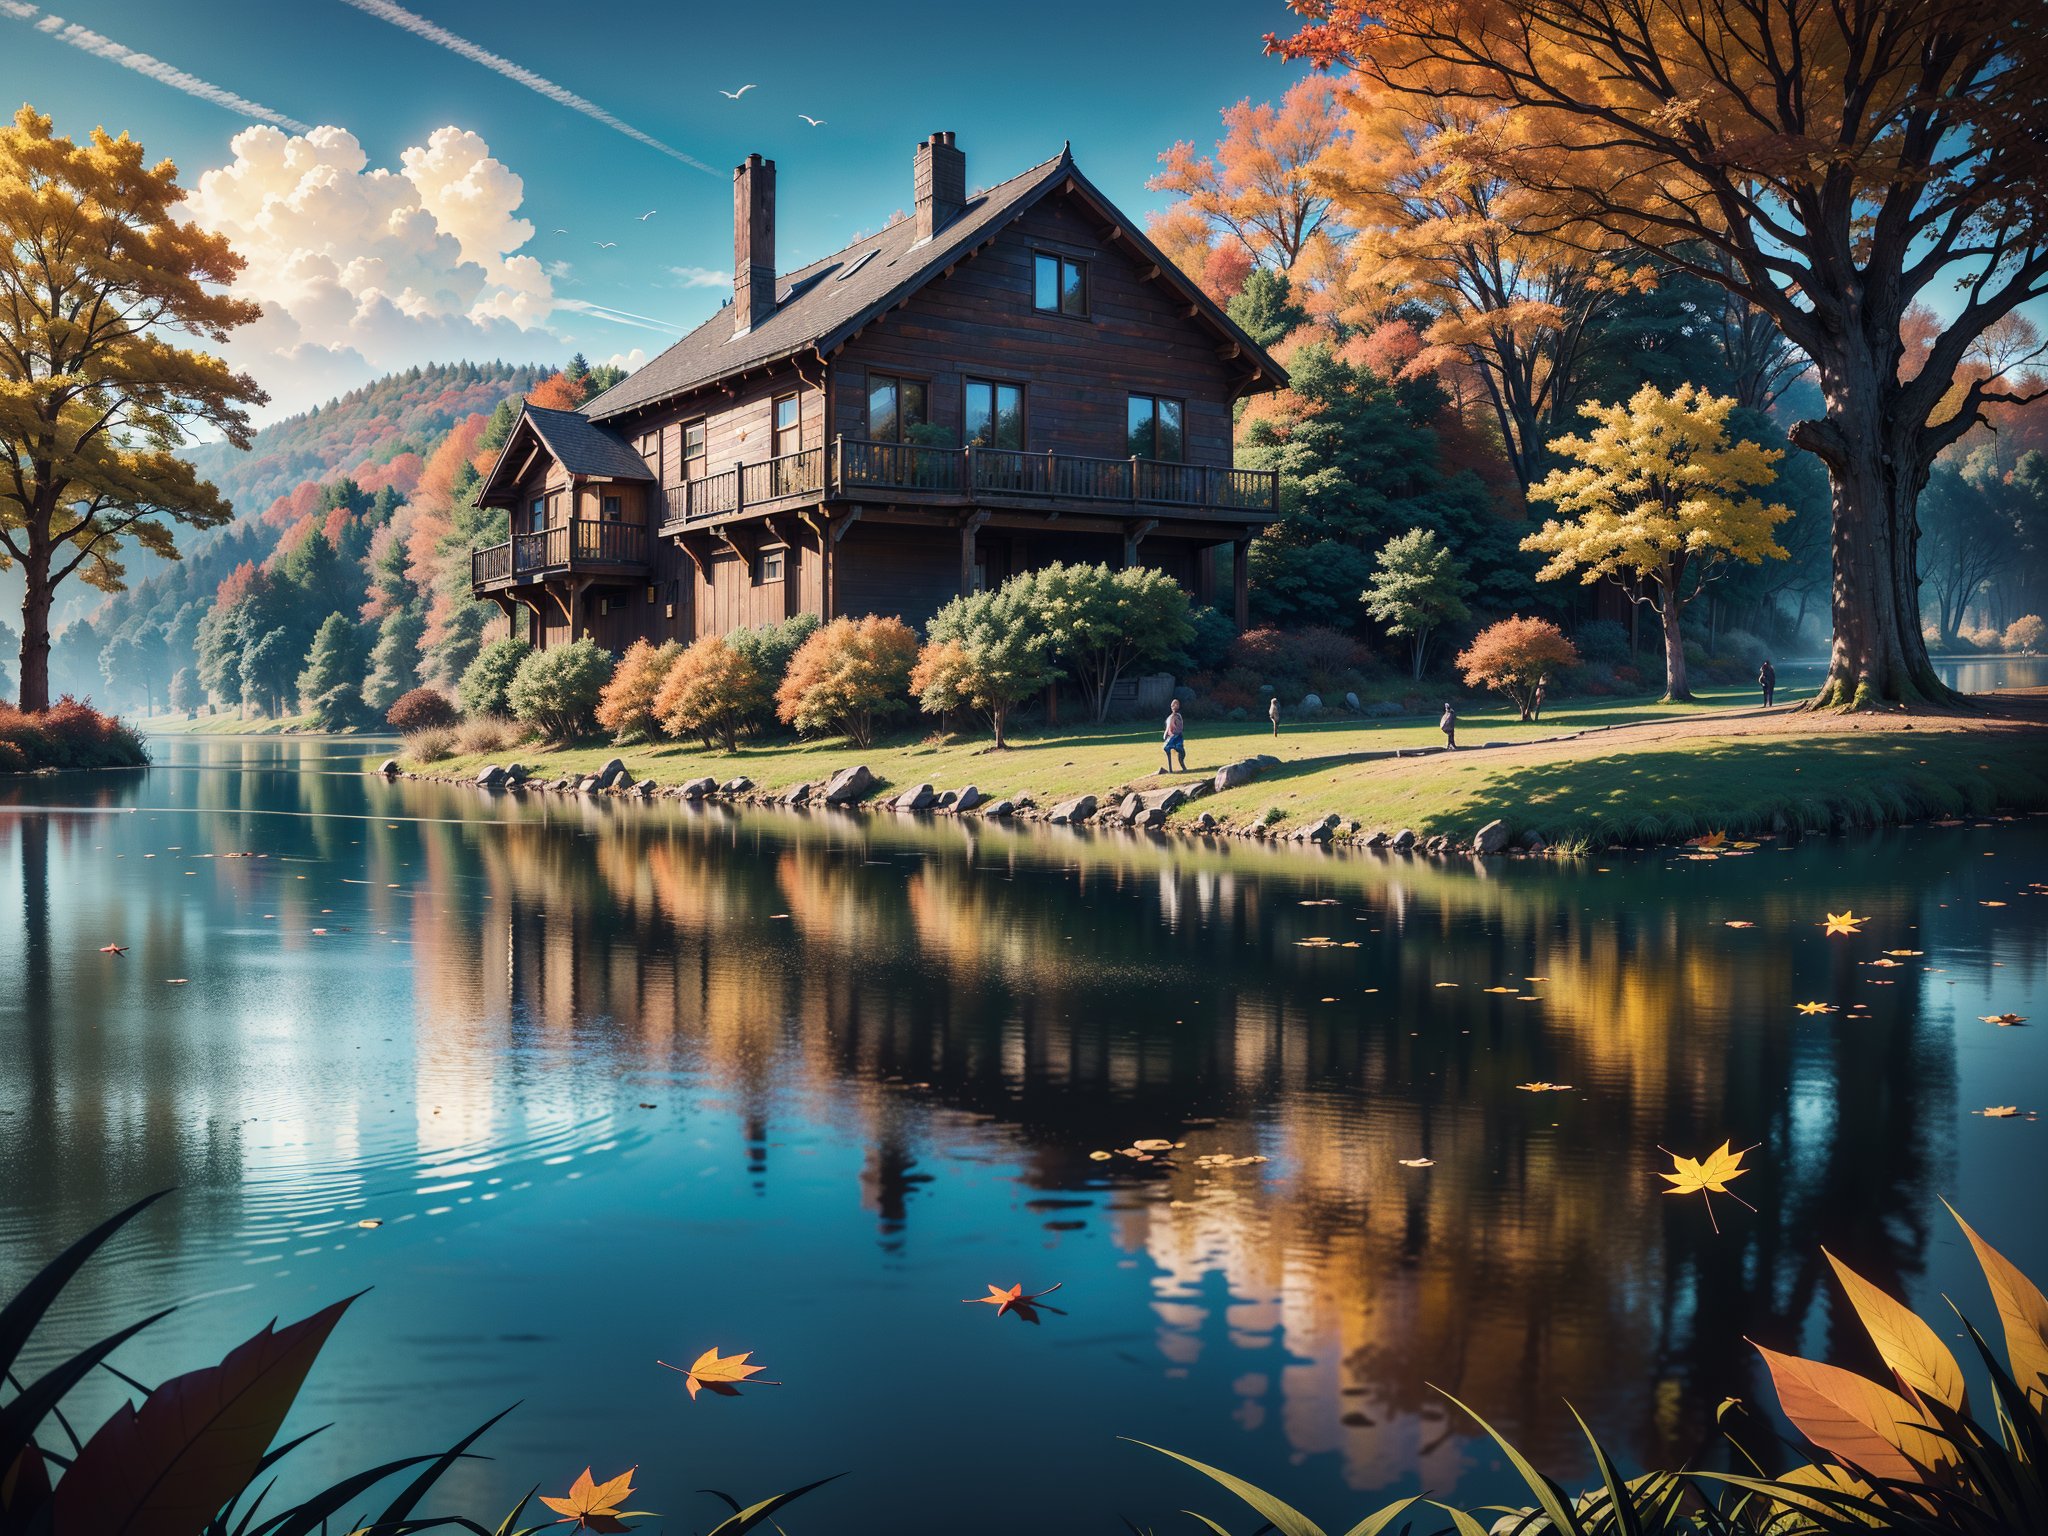 (masterpiece, legendary, highest_resolution, highly detailed), (hyper surrealism:1.4), sharpen_details, landscape_photography, (a stunning and vibrant HDR image of a big [wooden ? timber ? concerete] house during the autumn season with a beautiful lake in the foreground:1.5), (trees, fallen leaves, leaves falling, ground, grass, flower, sky, cloud, birds, sunlight, reflection, shadows, windy, ultra sharp), (intricate tree details, extremely detailed CG, creative use of empty space:1.3), (best quality, 64K, UHD, captivating, lifelike, immersive, no human, no character)